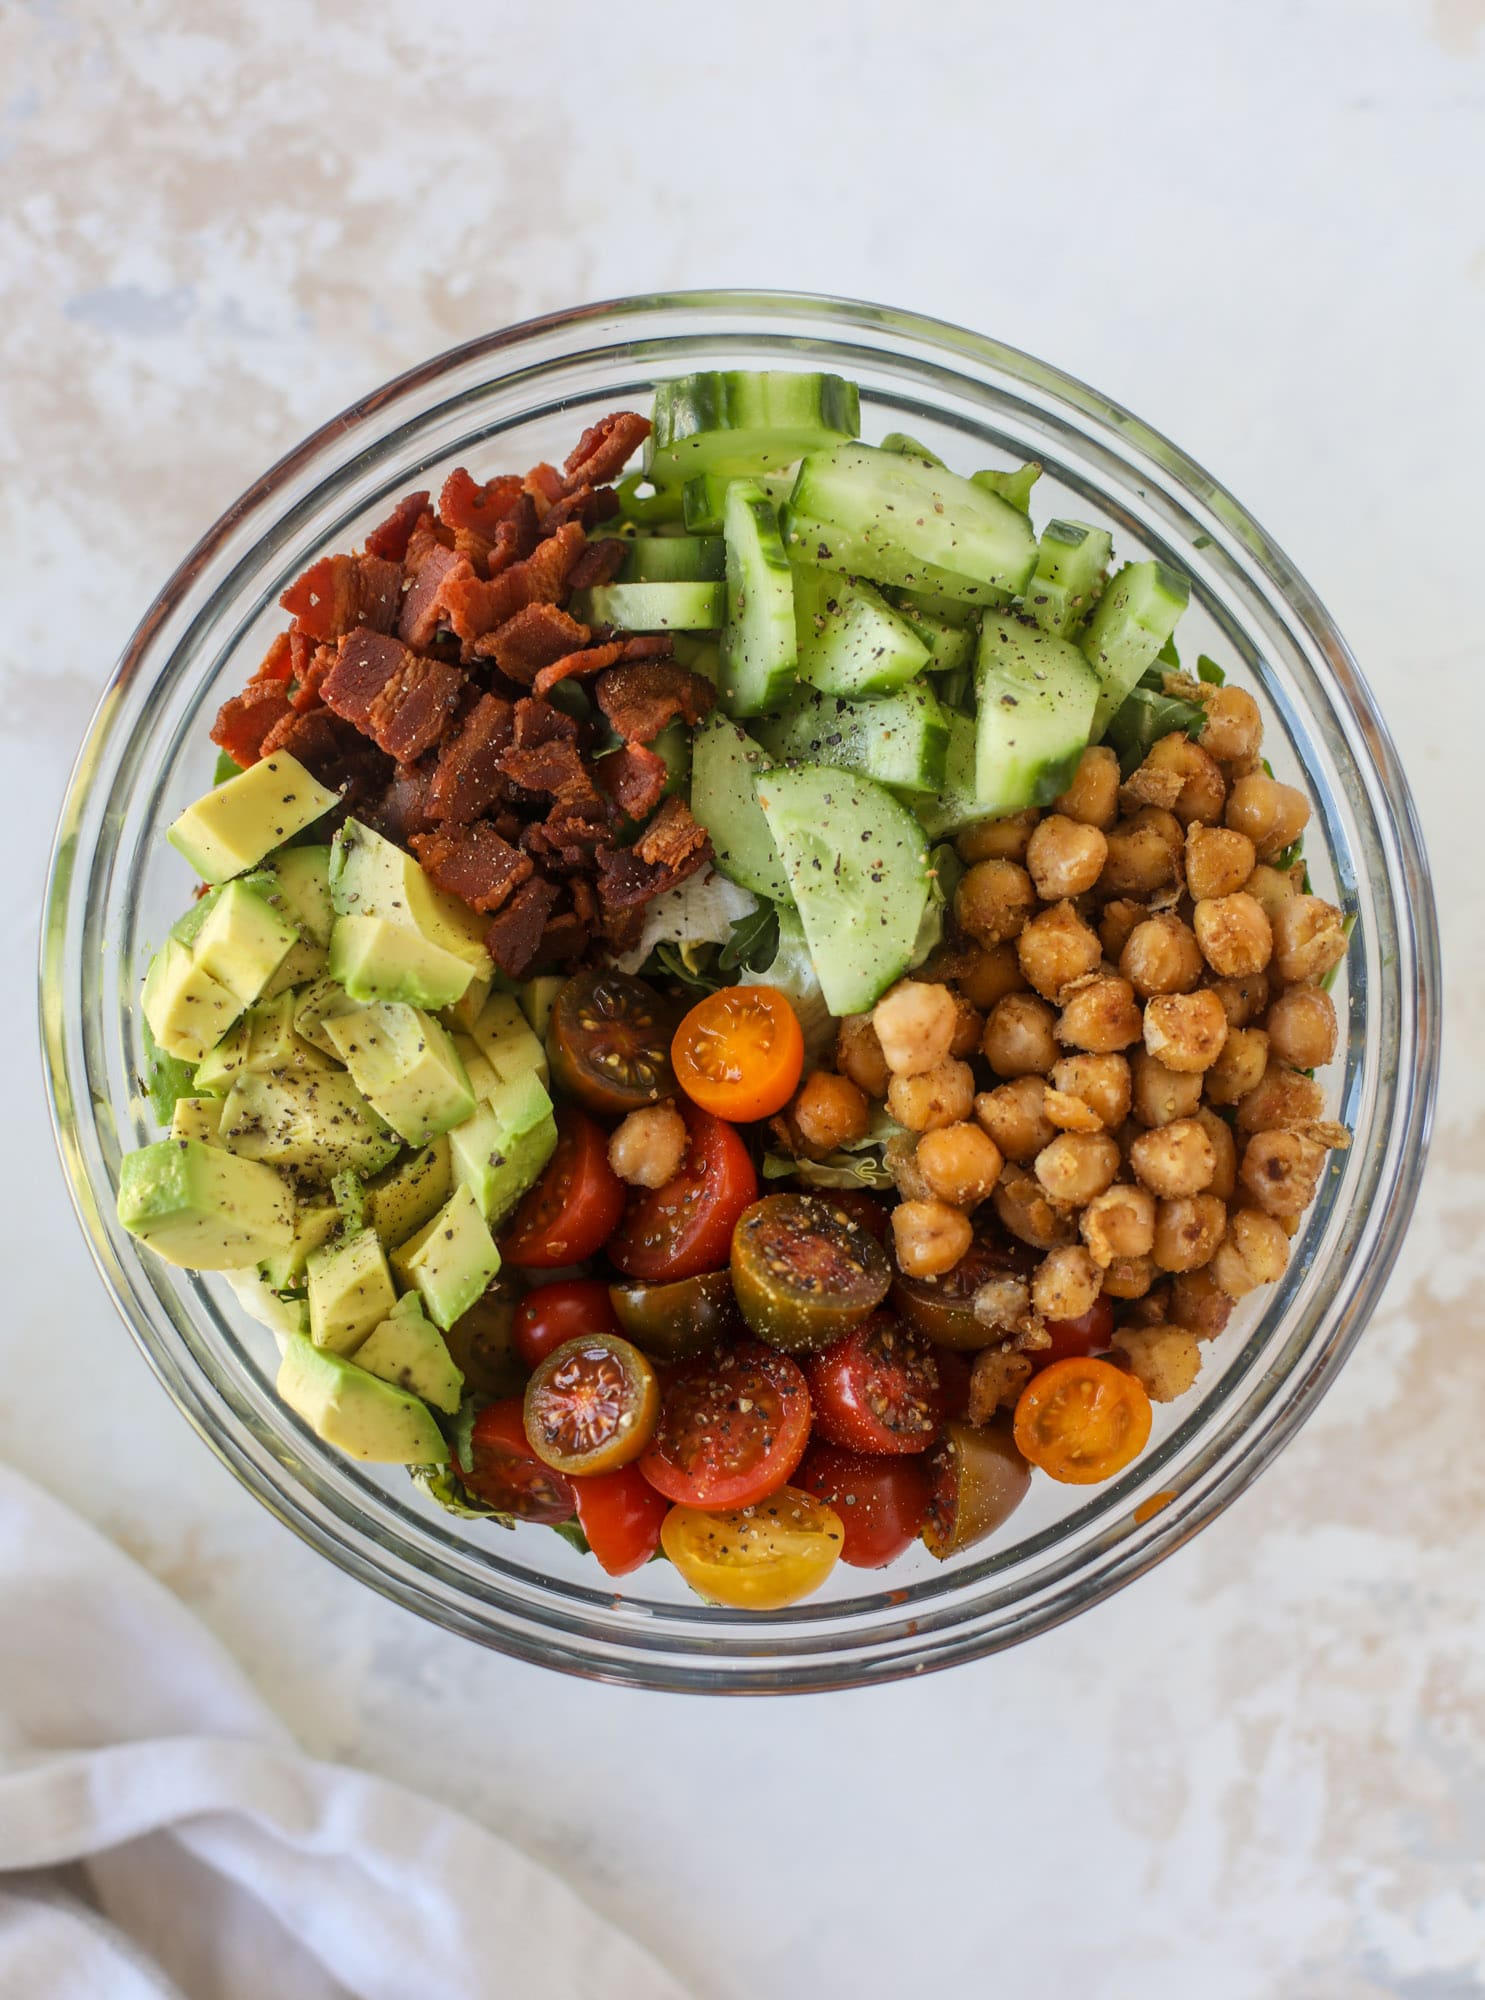 The chickpea bacon ranch salad has a ton of crispy, crunchy texture and flavor. It's satisfying and super easy to prep ahead of time too! I howsweeteats.com #chickpea #salad